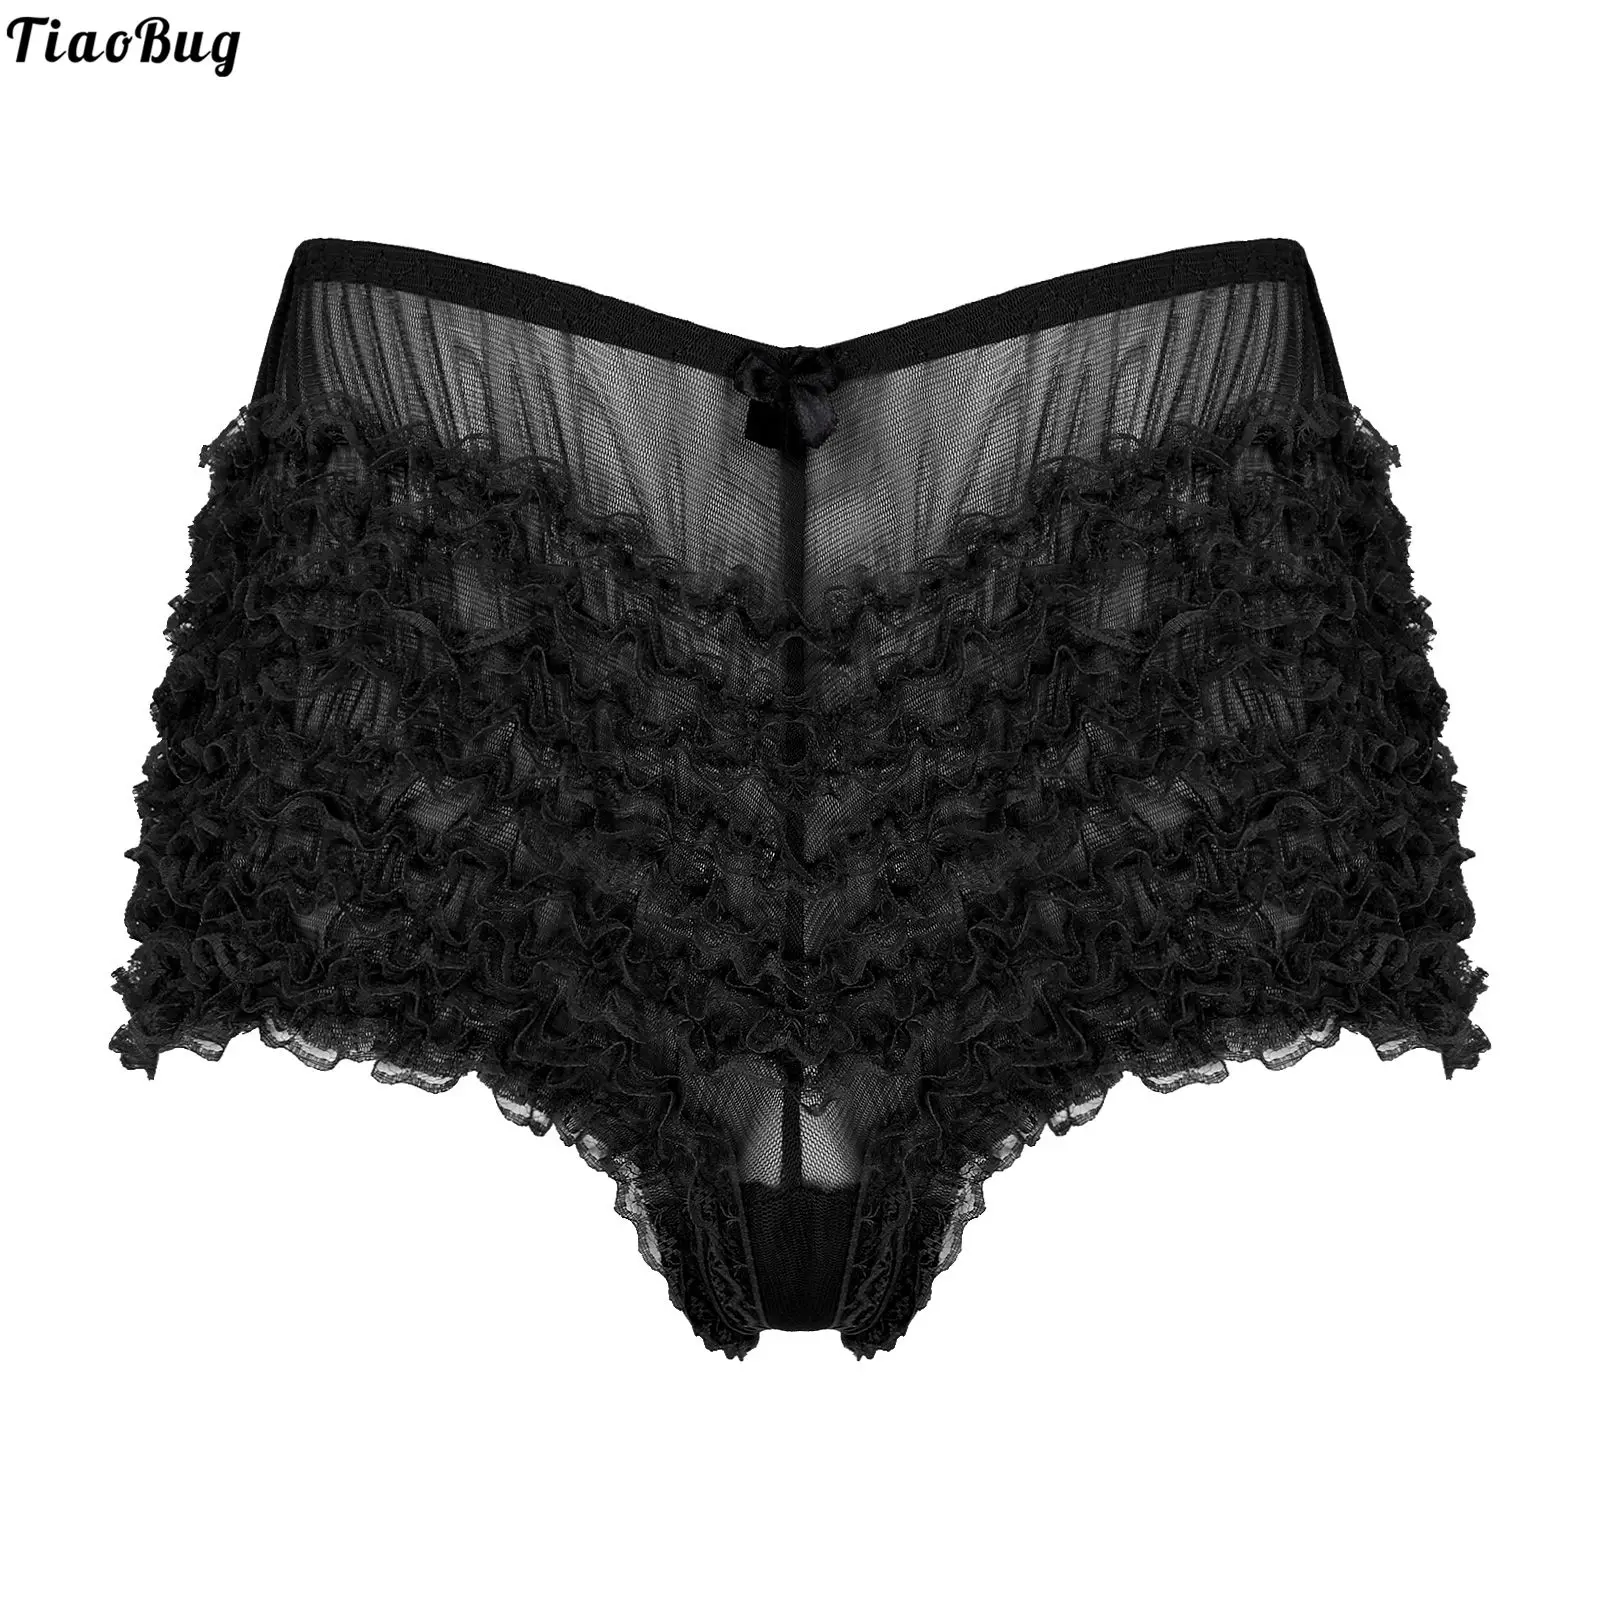 

TiaoBug Sissy Gay Men Adult Sexy Lace Ruffle Dance Shorts Elastic Waist Translucent Boxer Underwear Panties For Dance Practice